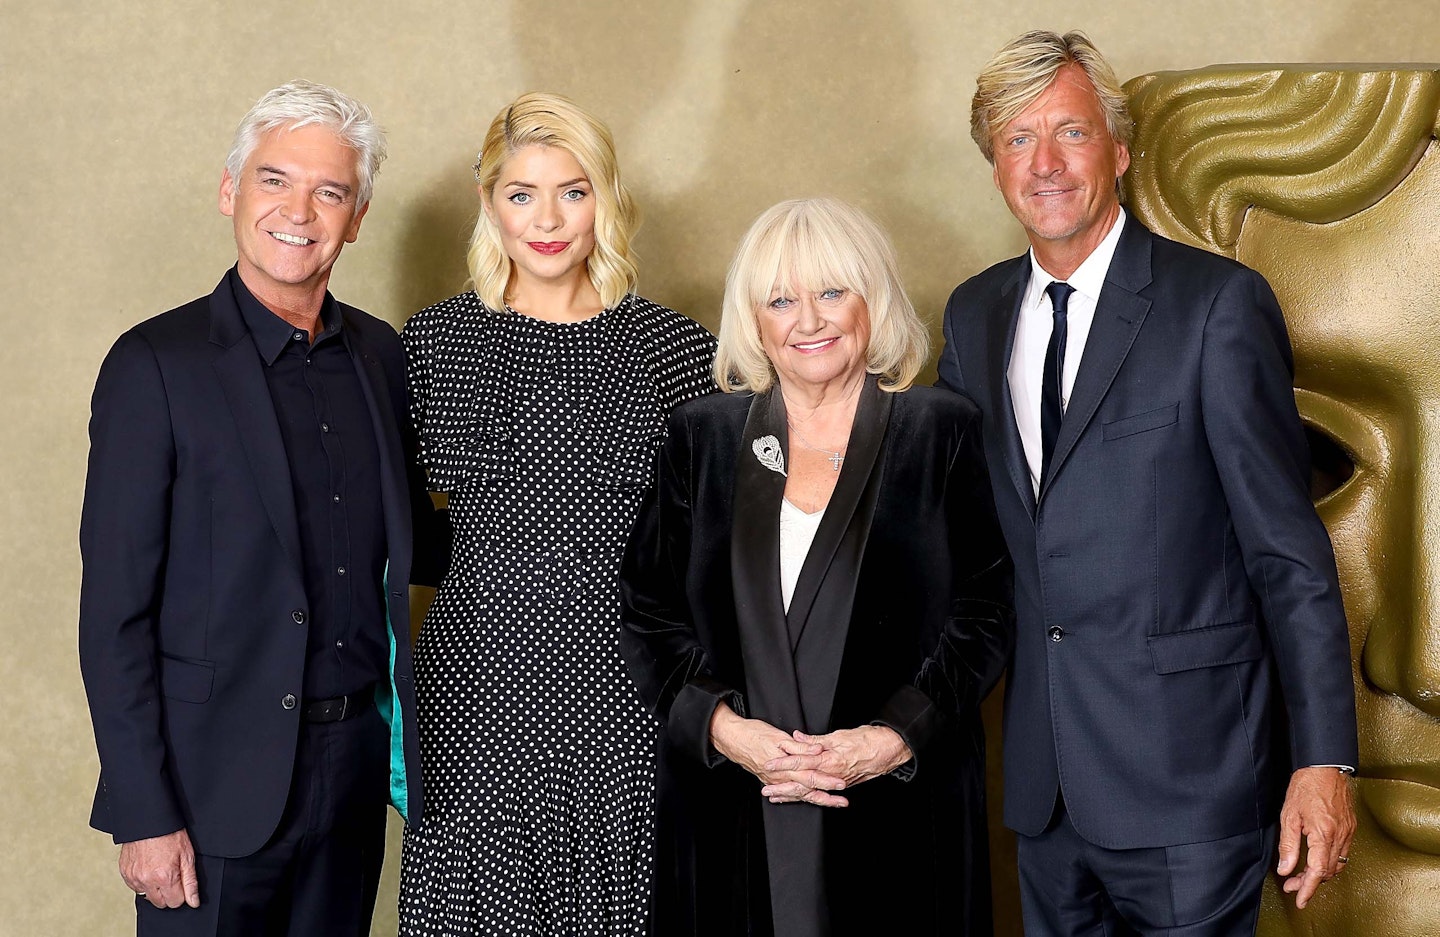 Phillip Schofield and Holly Willougby with Richard and Judy in 2018